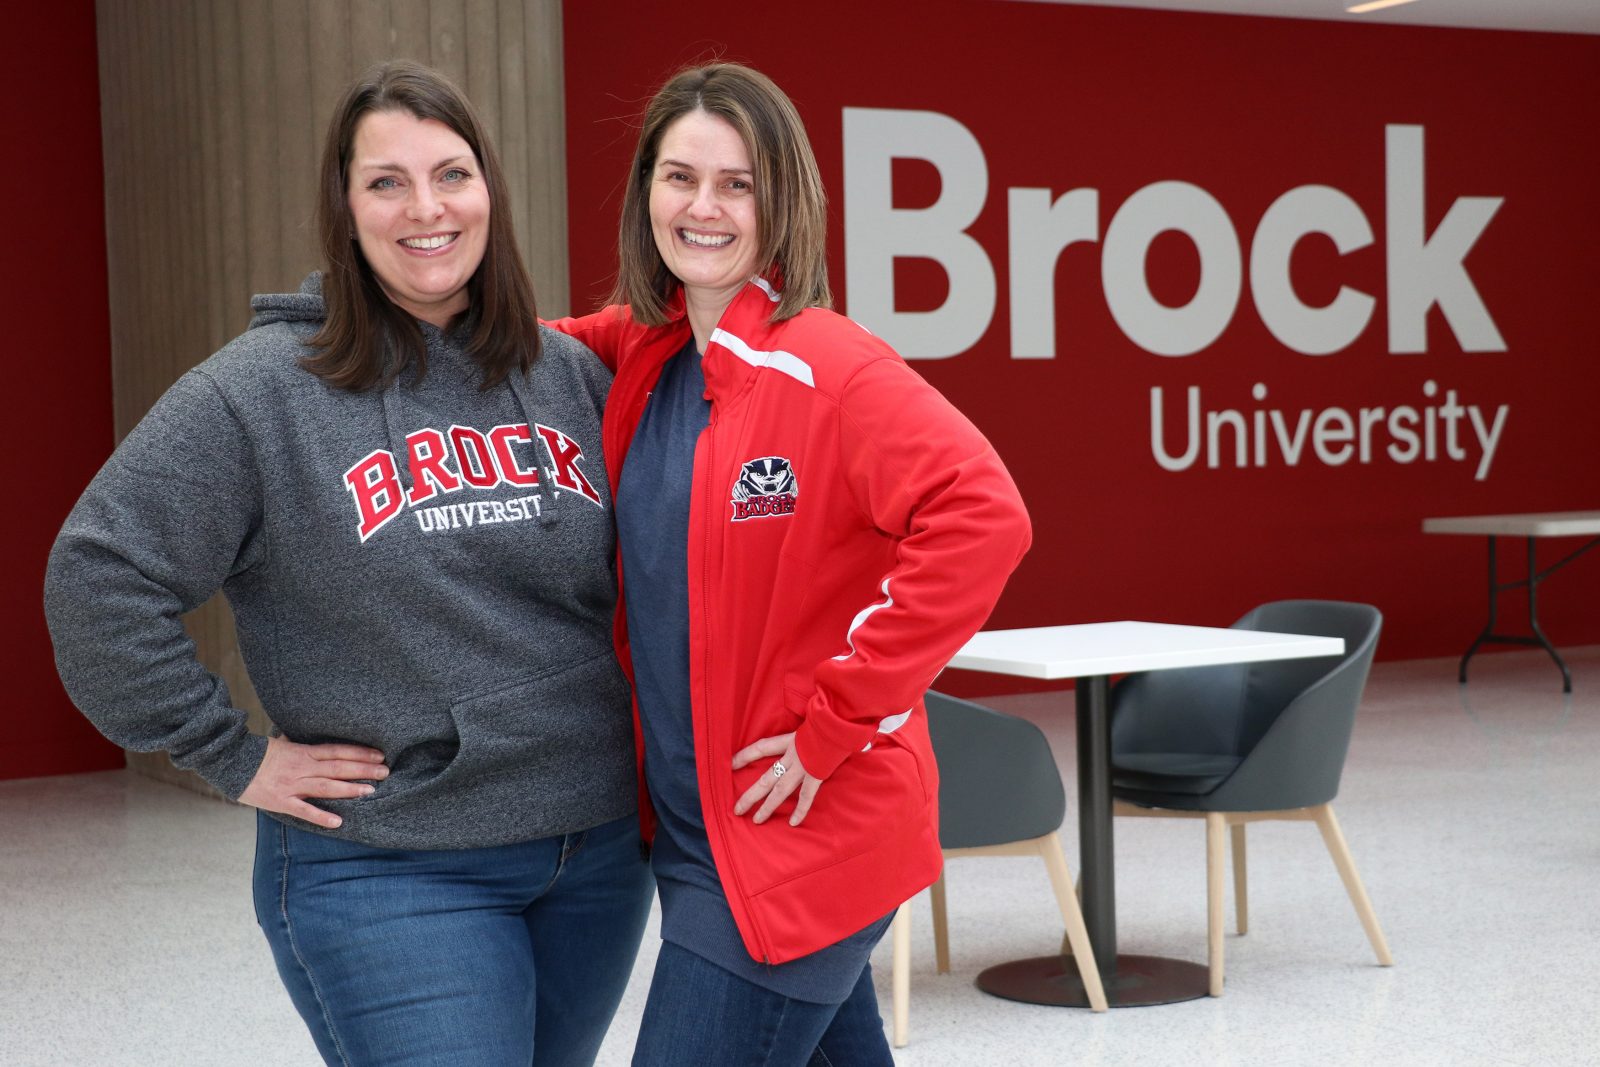 Two women pose for a photo in front of a red wall that reads Brock University. Both women are wearing Brock University sweaters.